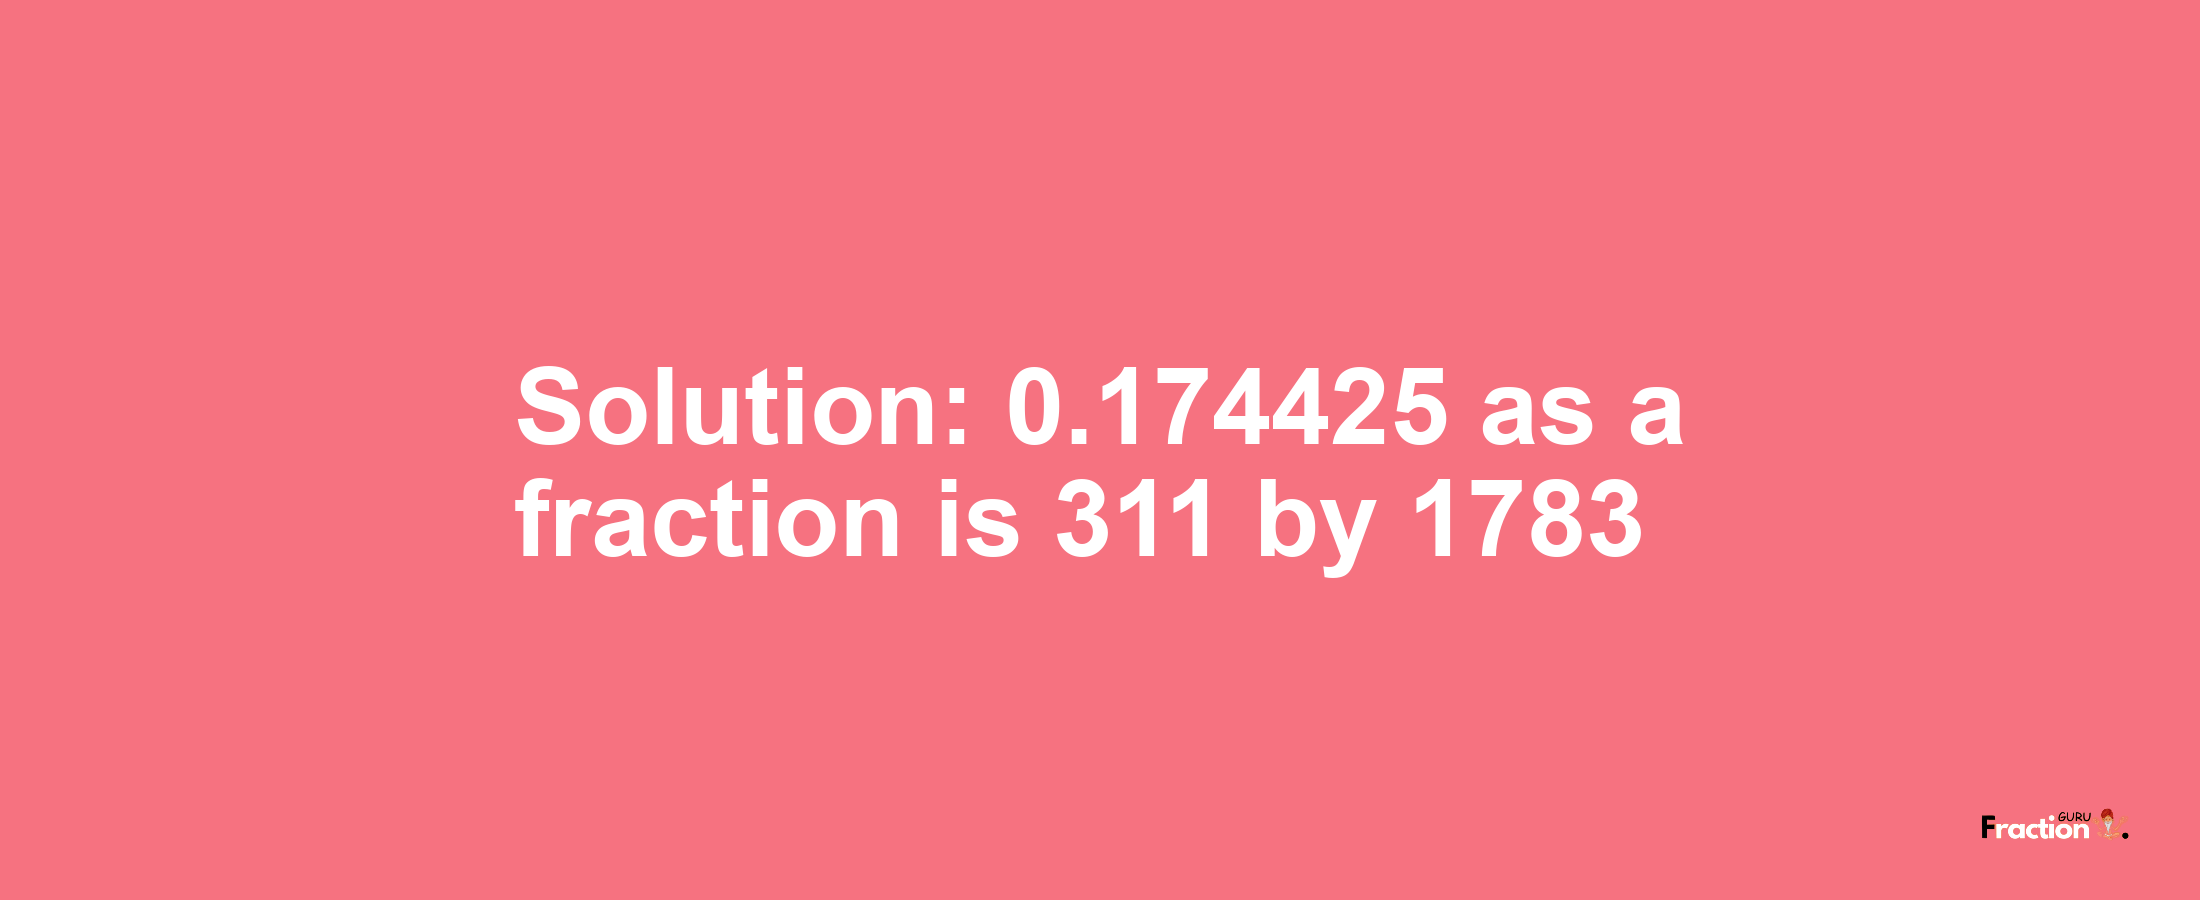 Solution:0.174425 as a fraction is 311/1783